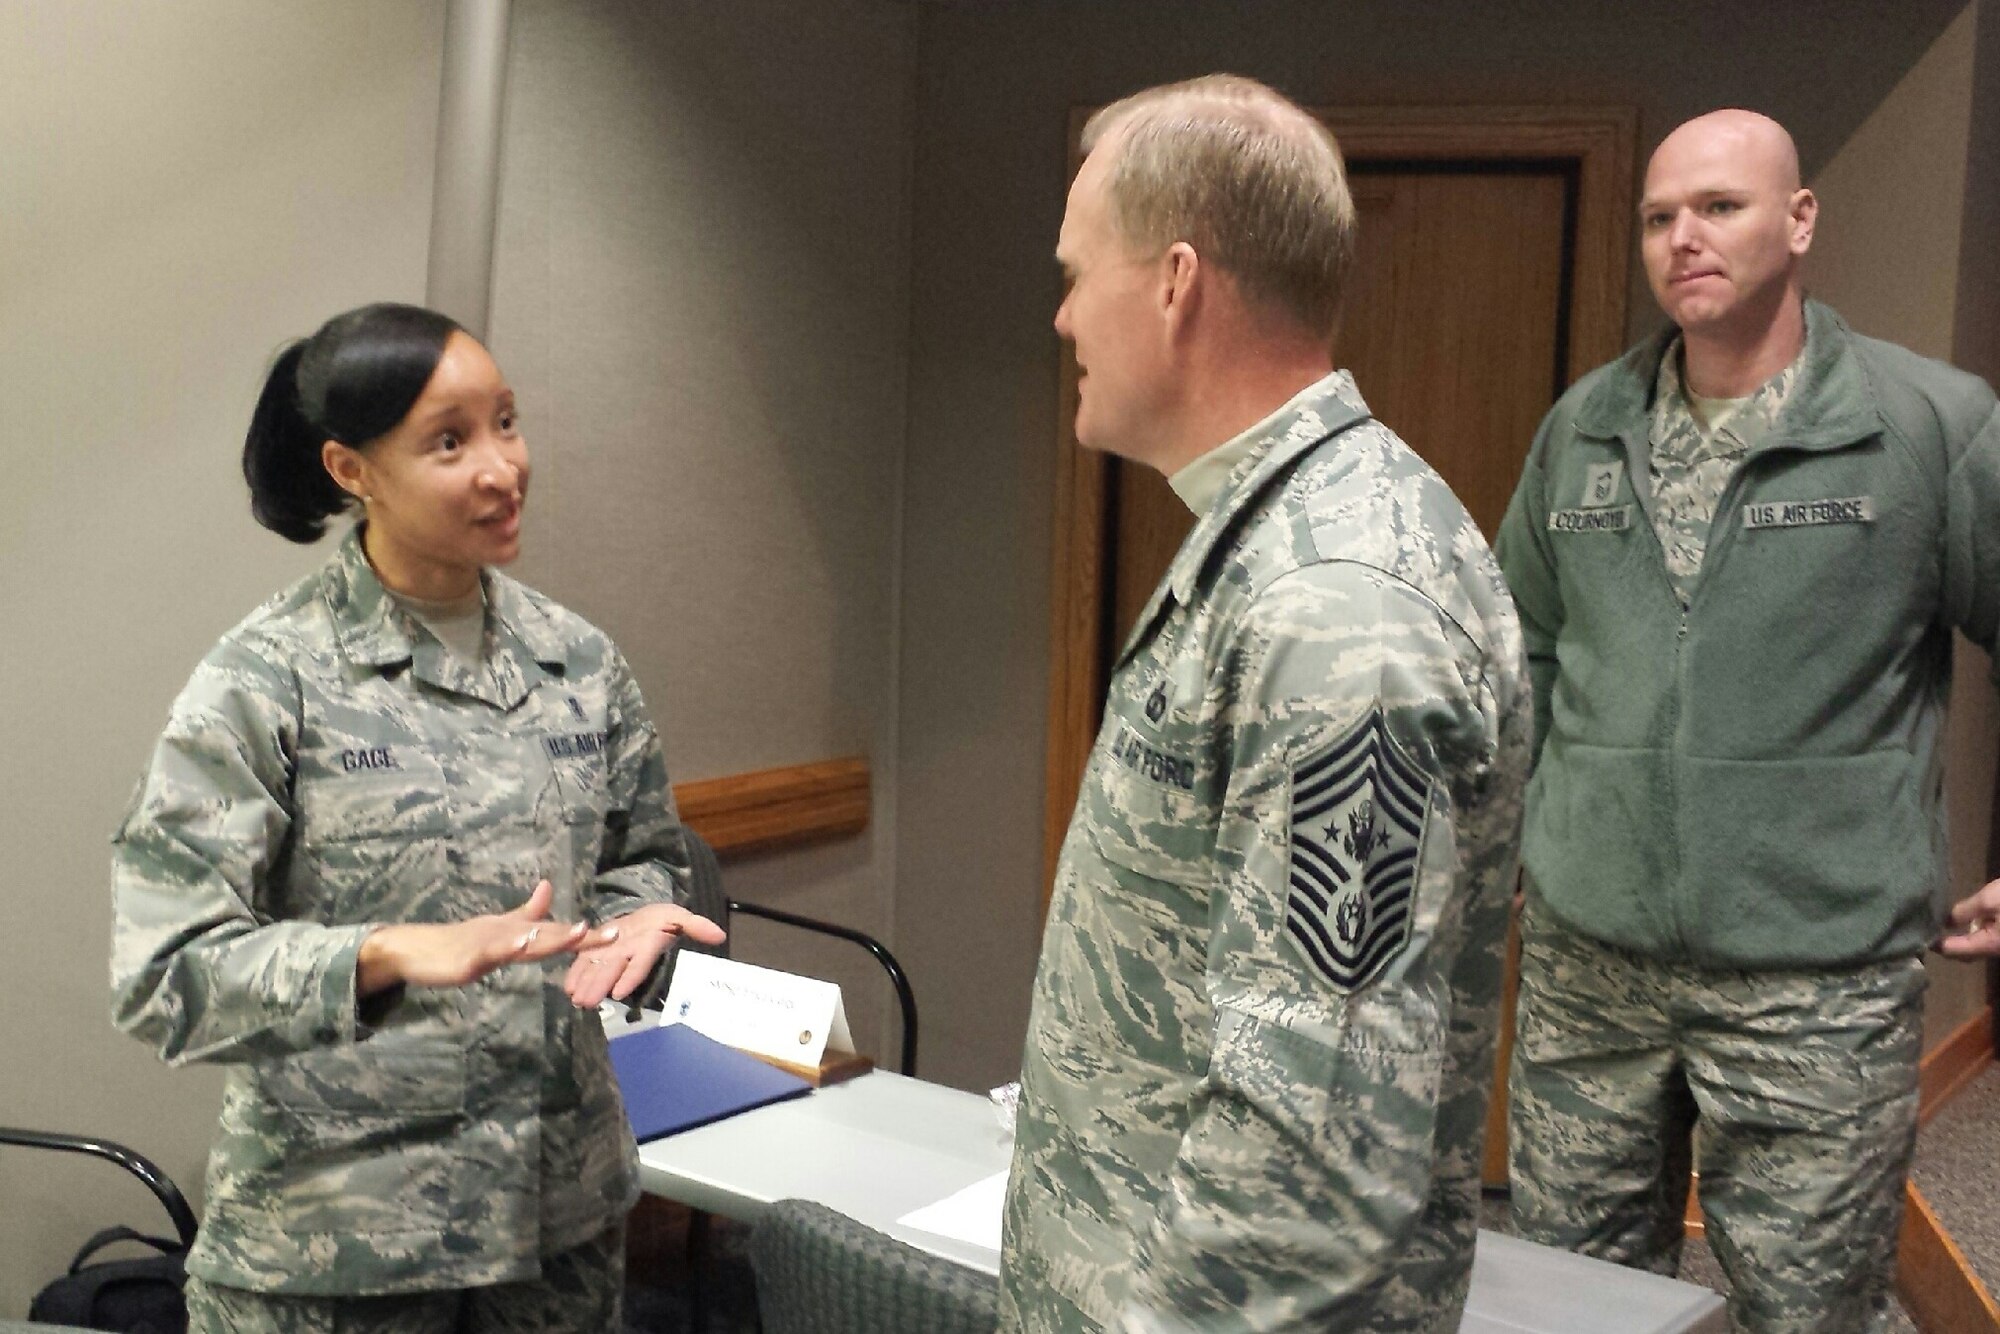 Chief Master Sgt. of the Air Force James Cody chats with Senior Master Sgt. Erica Gage, one of the AFMC Chiefs' Orientation attendees, during a break. Cody offered his leadership perspective at one of the orientation sessions. (U.S. Air Force photo/Kim Bowden)